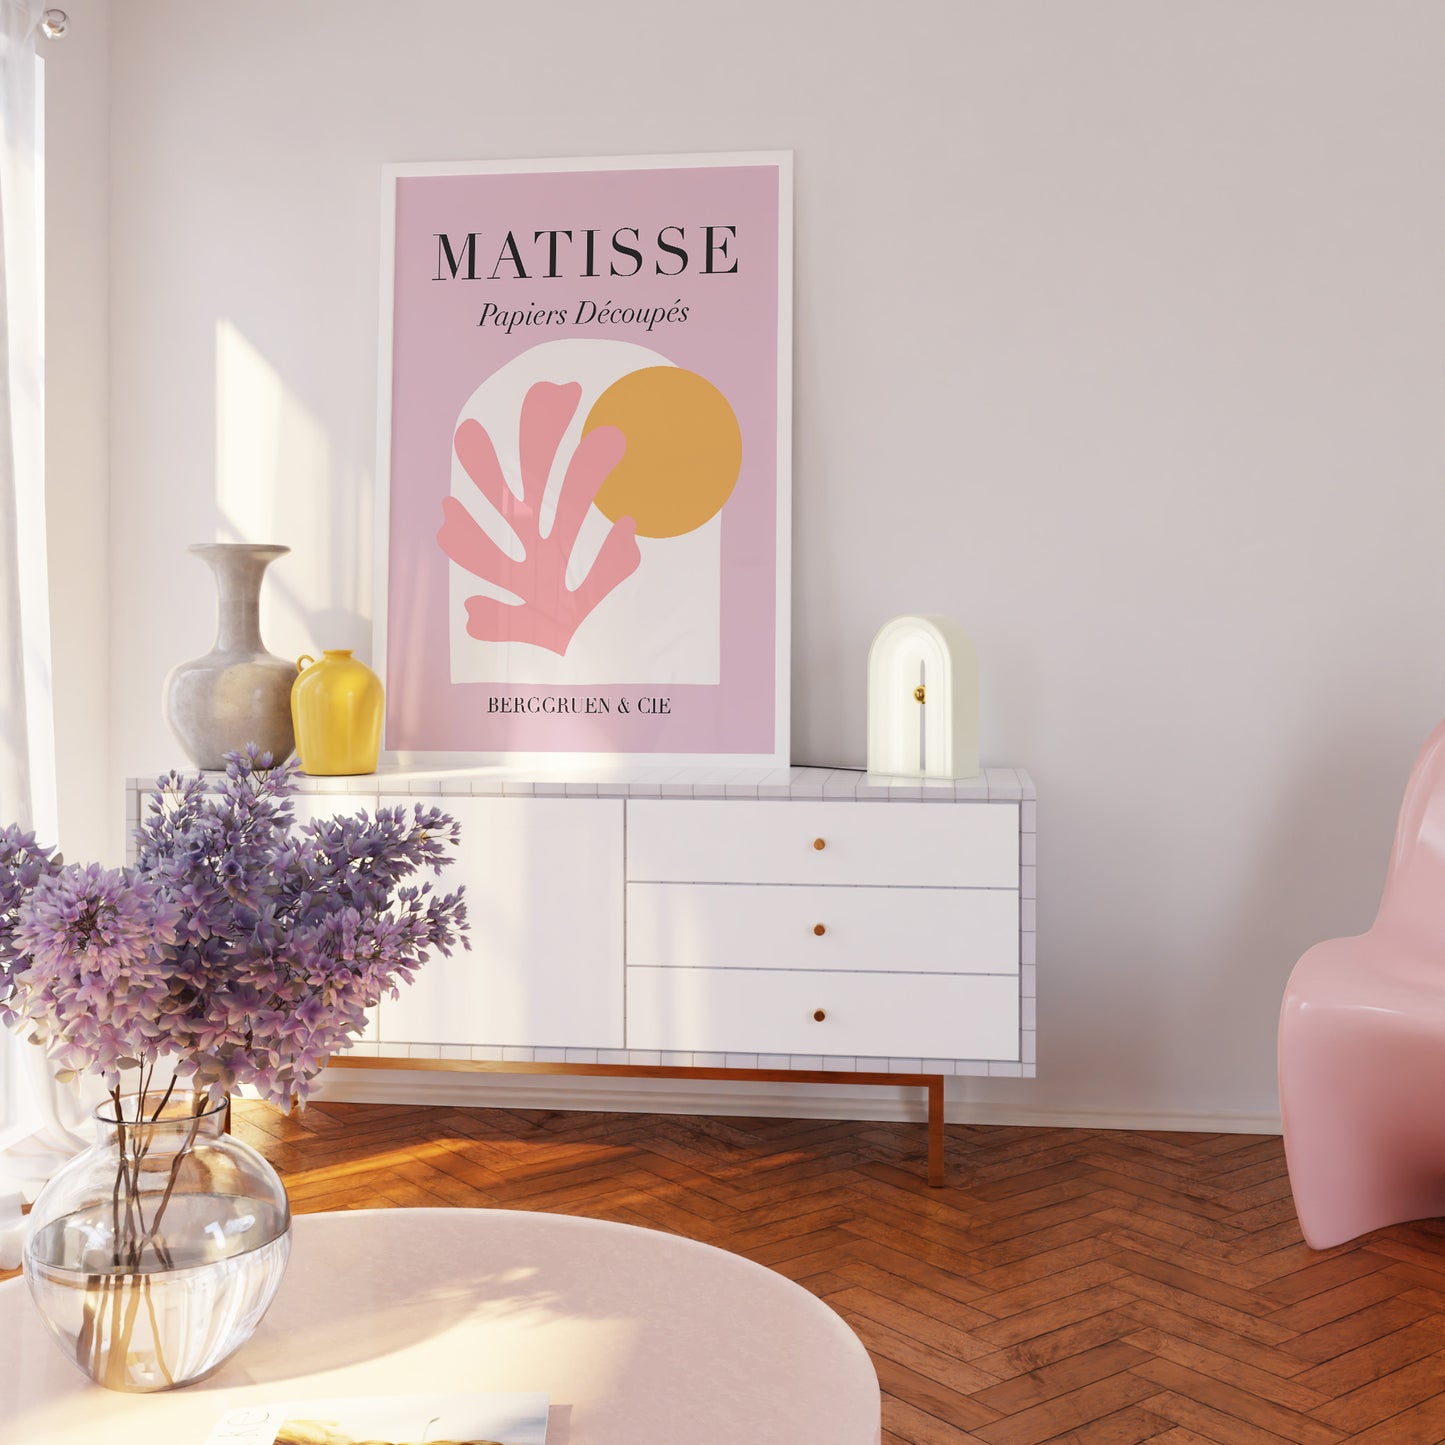 Matisse Inspired Exhibition-Style Wall Poster Print